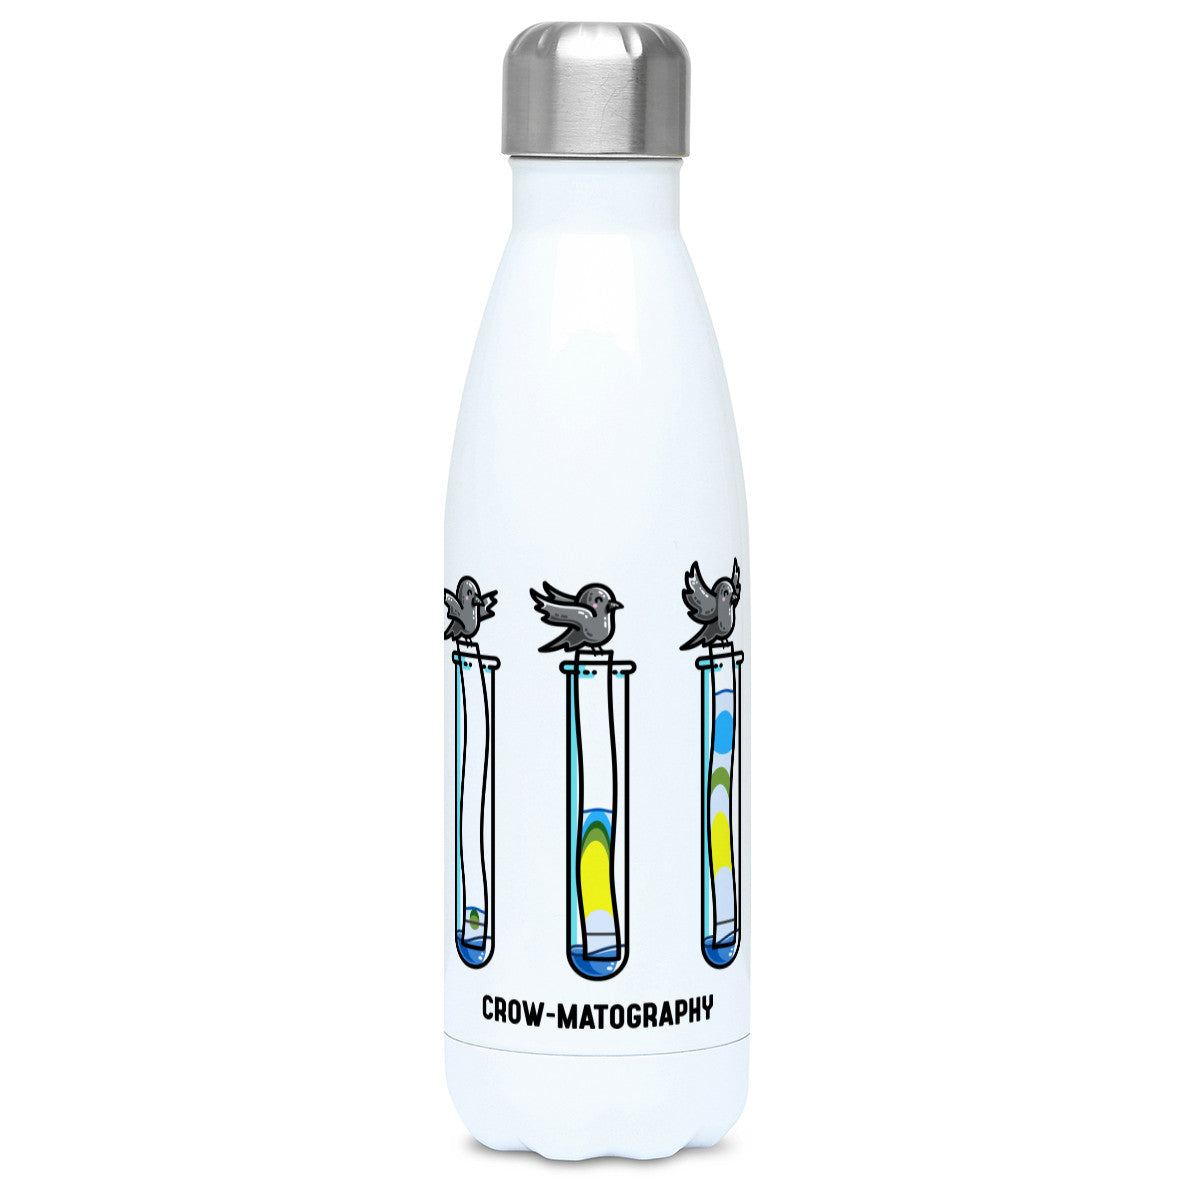 A tall white stainless steel drinks bottle seen from the front with its silver lid on and a design of 3 crows holding strips of paper into 3 test tubes showing colour separation.